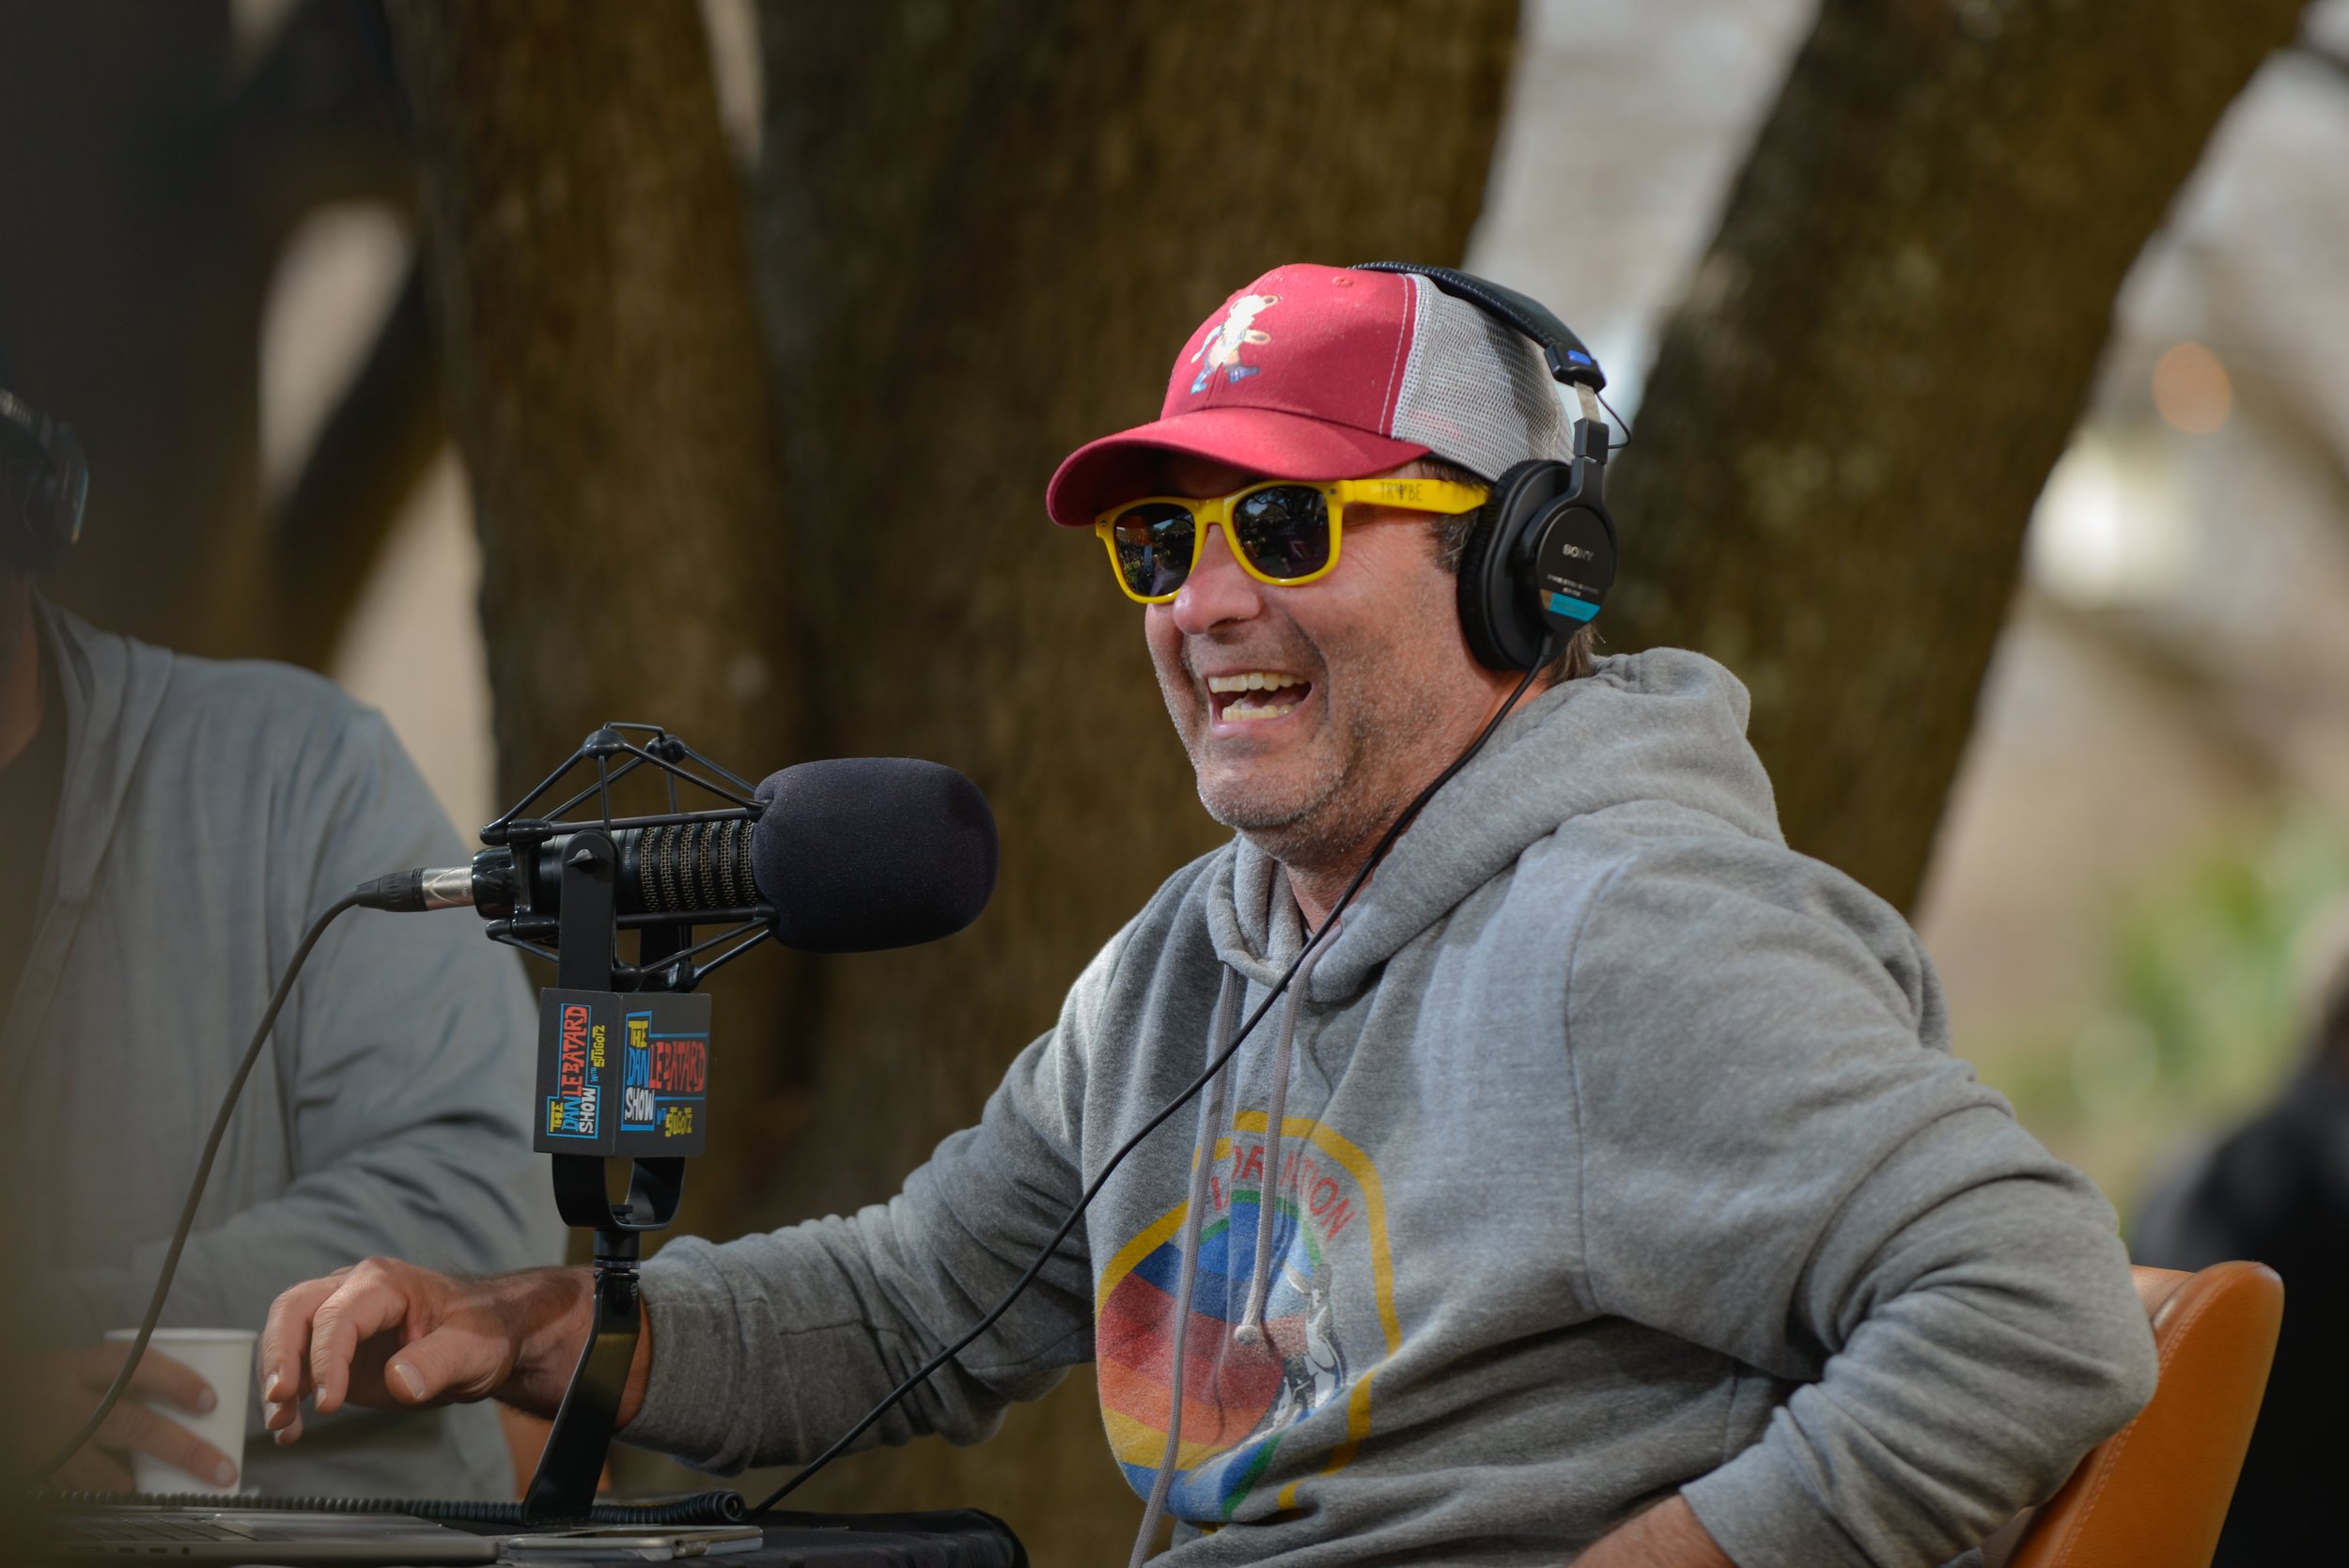 Stugotz at SXSW for The Dan Le Batard Show with Stugotz